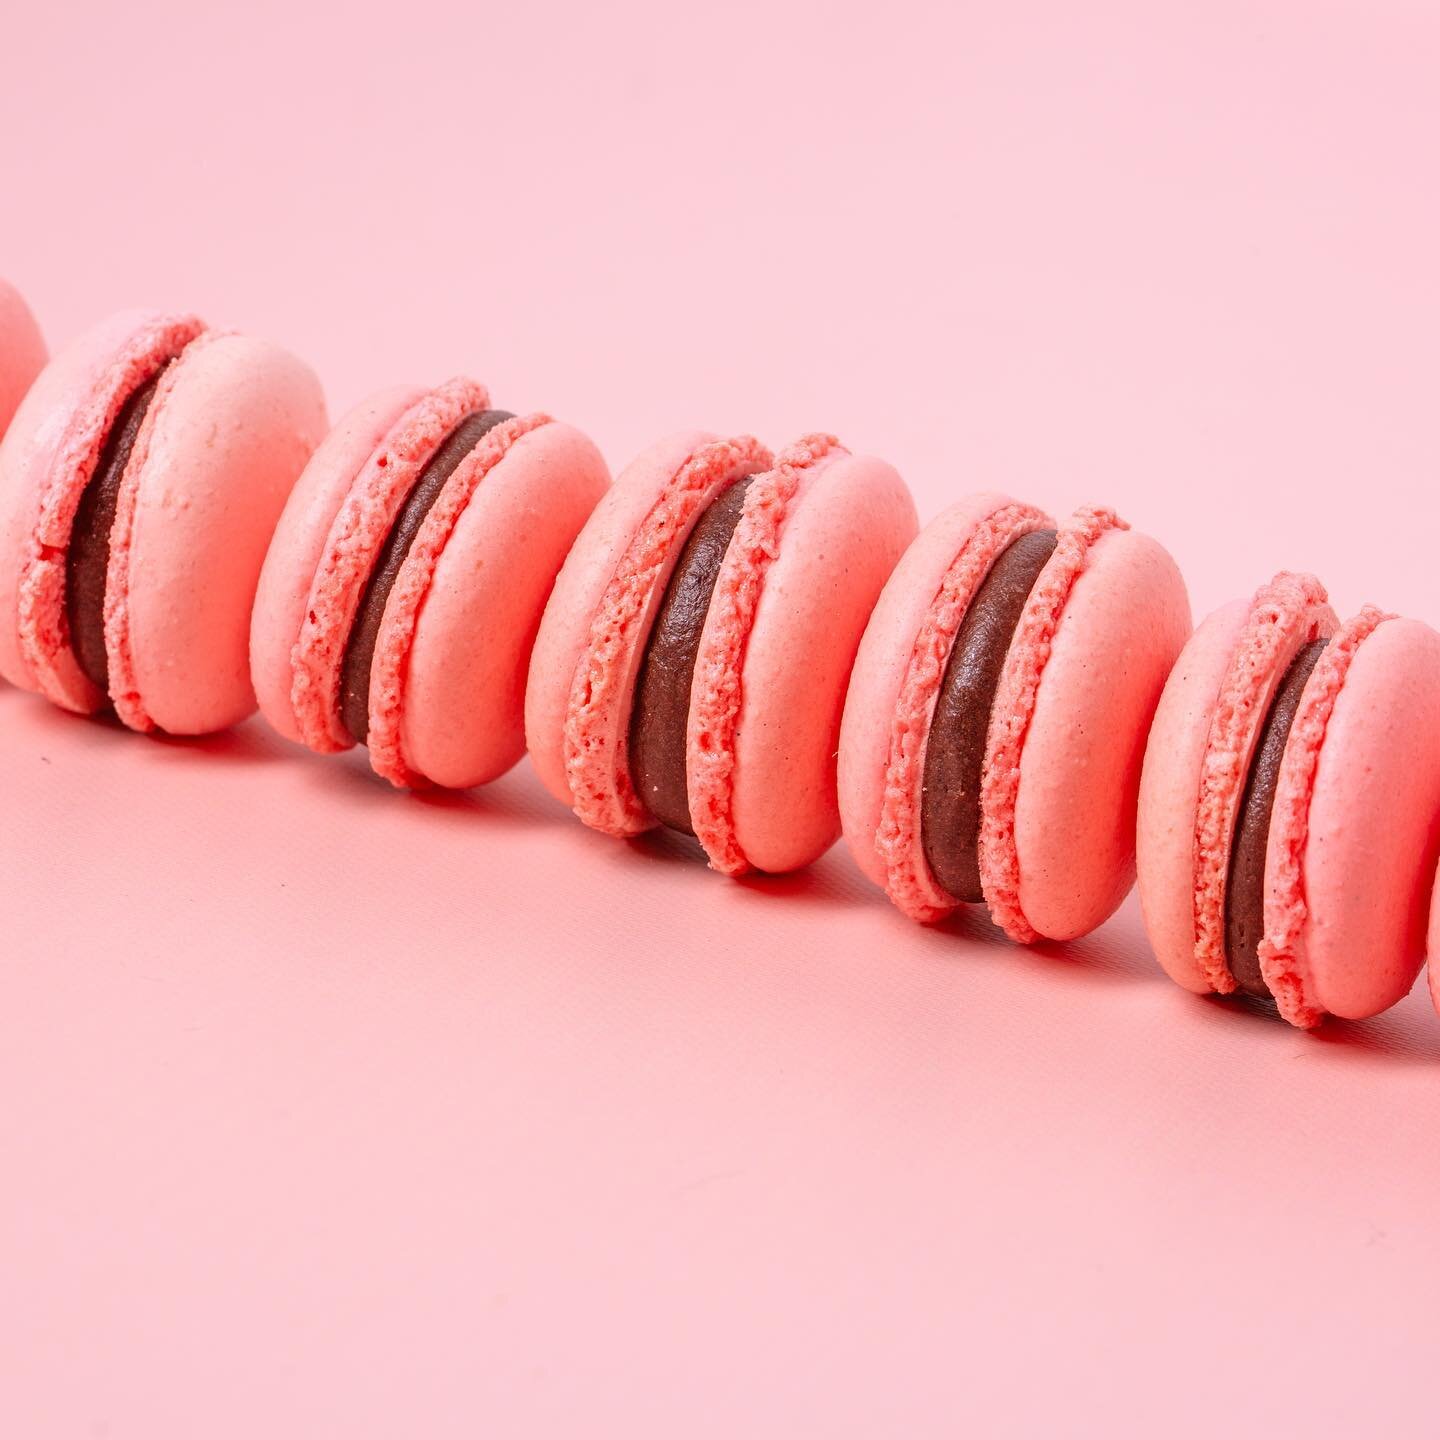 So close you can almost taste them. They were really delicious! @poppytons.patisserie #macarons #french #pastry #baking #dessert #frenchdessert #confections #sugar #valentinesday